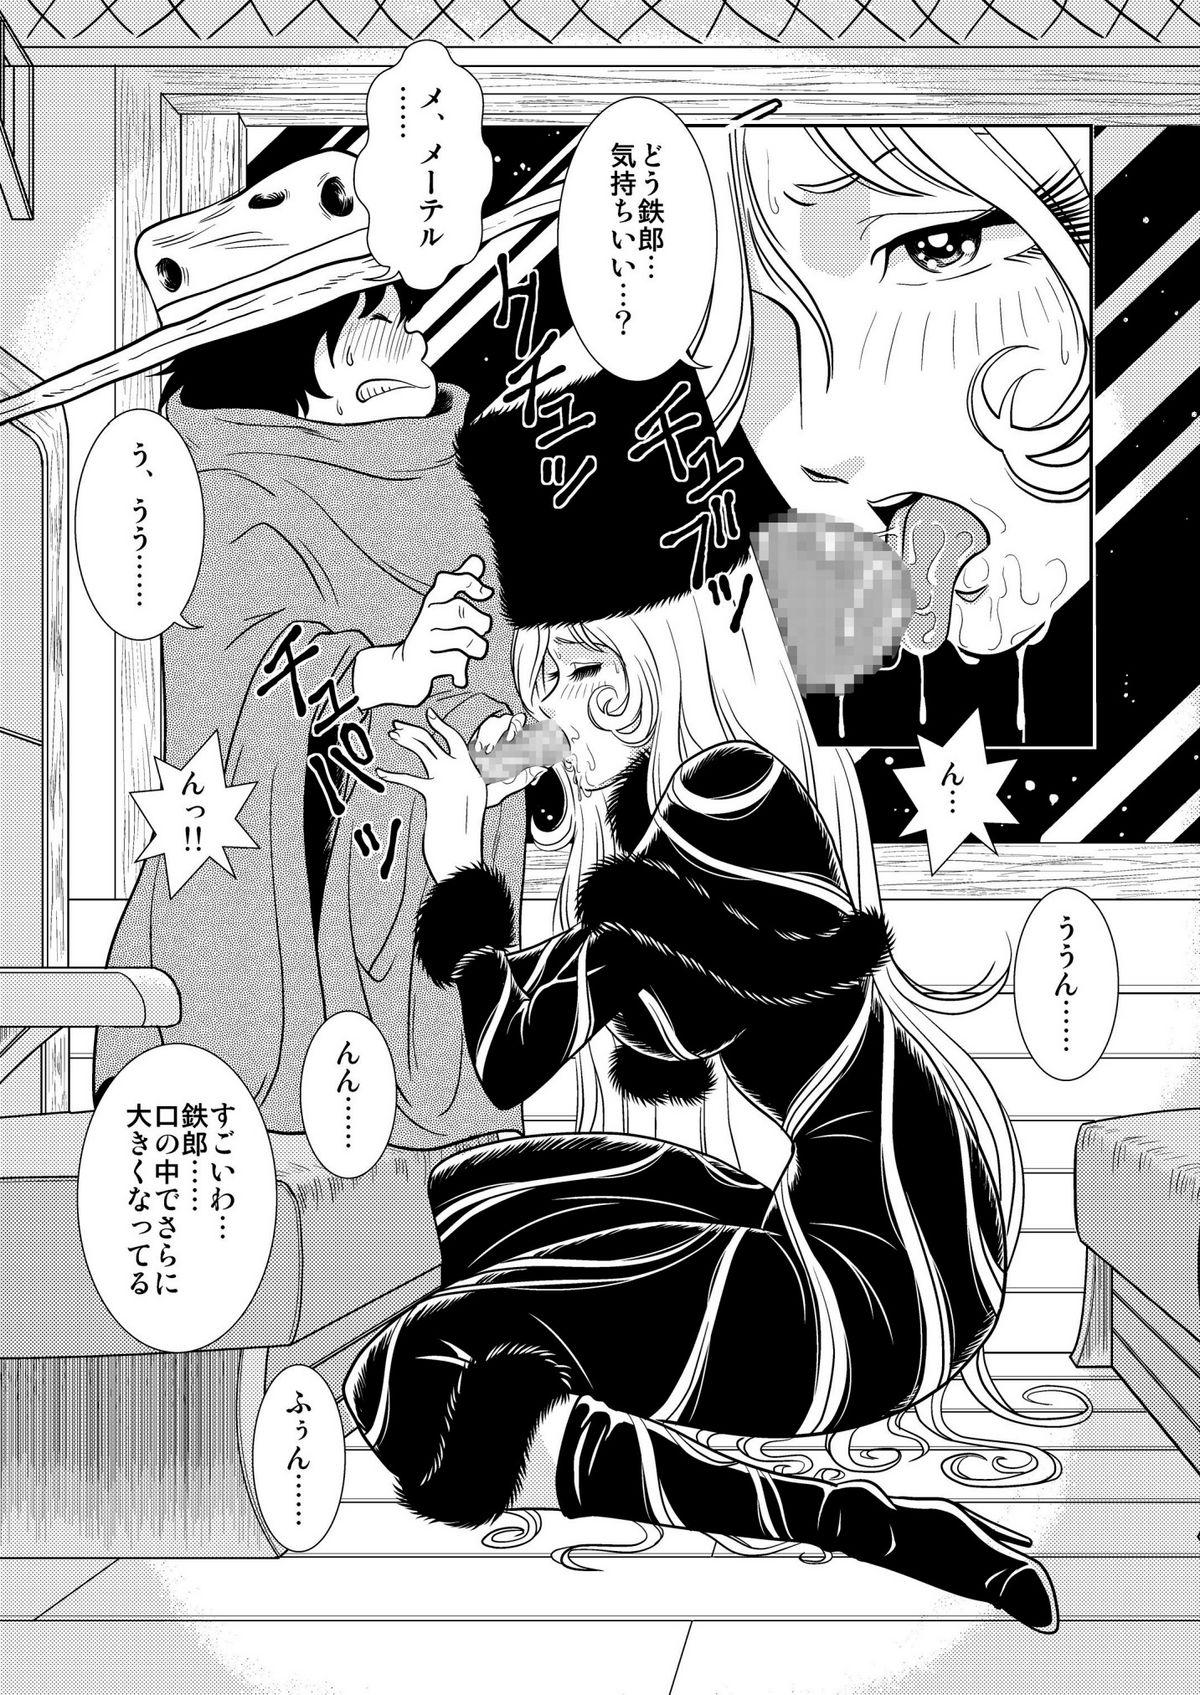 Vietnamese Maetel Story 2 - Galaxy express 999 Gay Military - Page 9